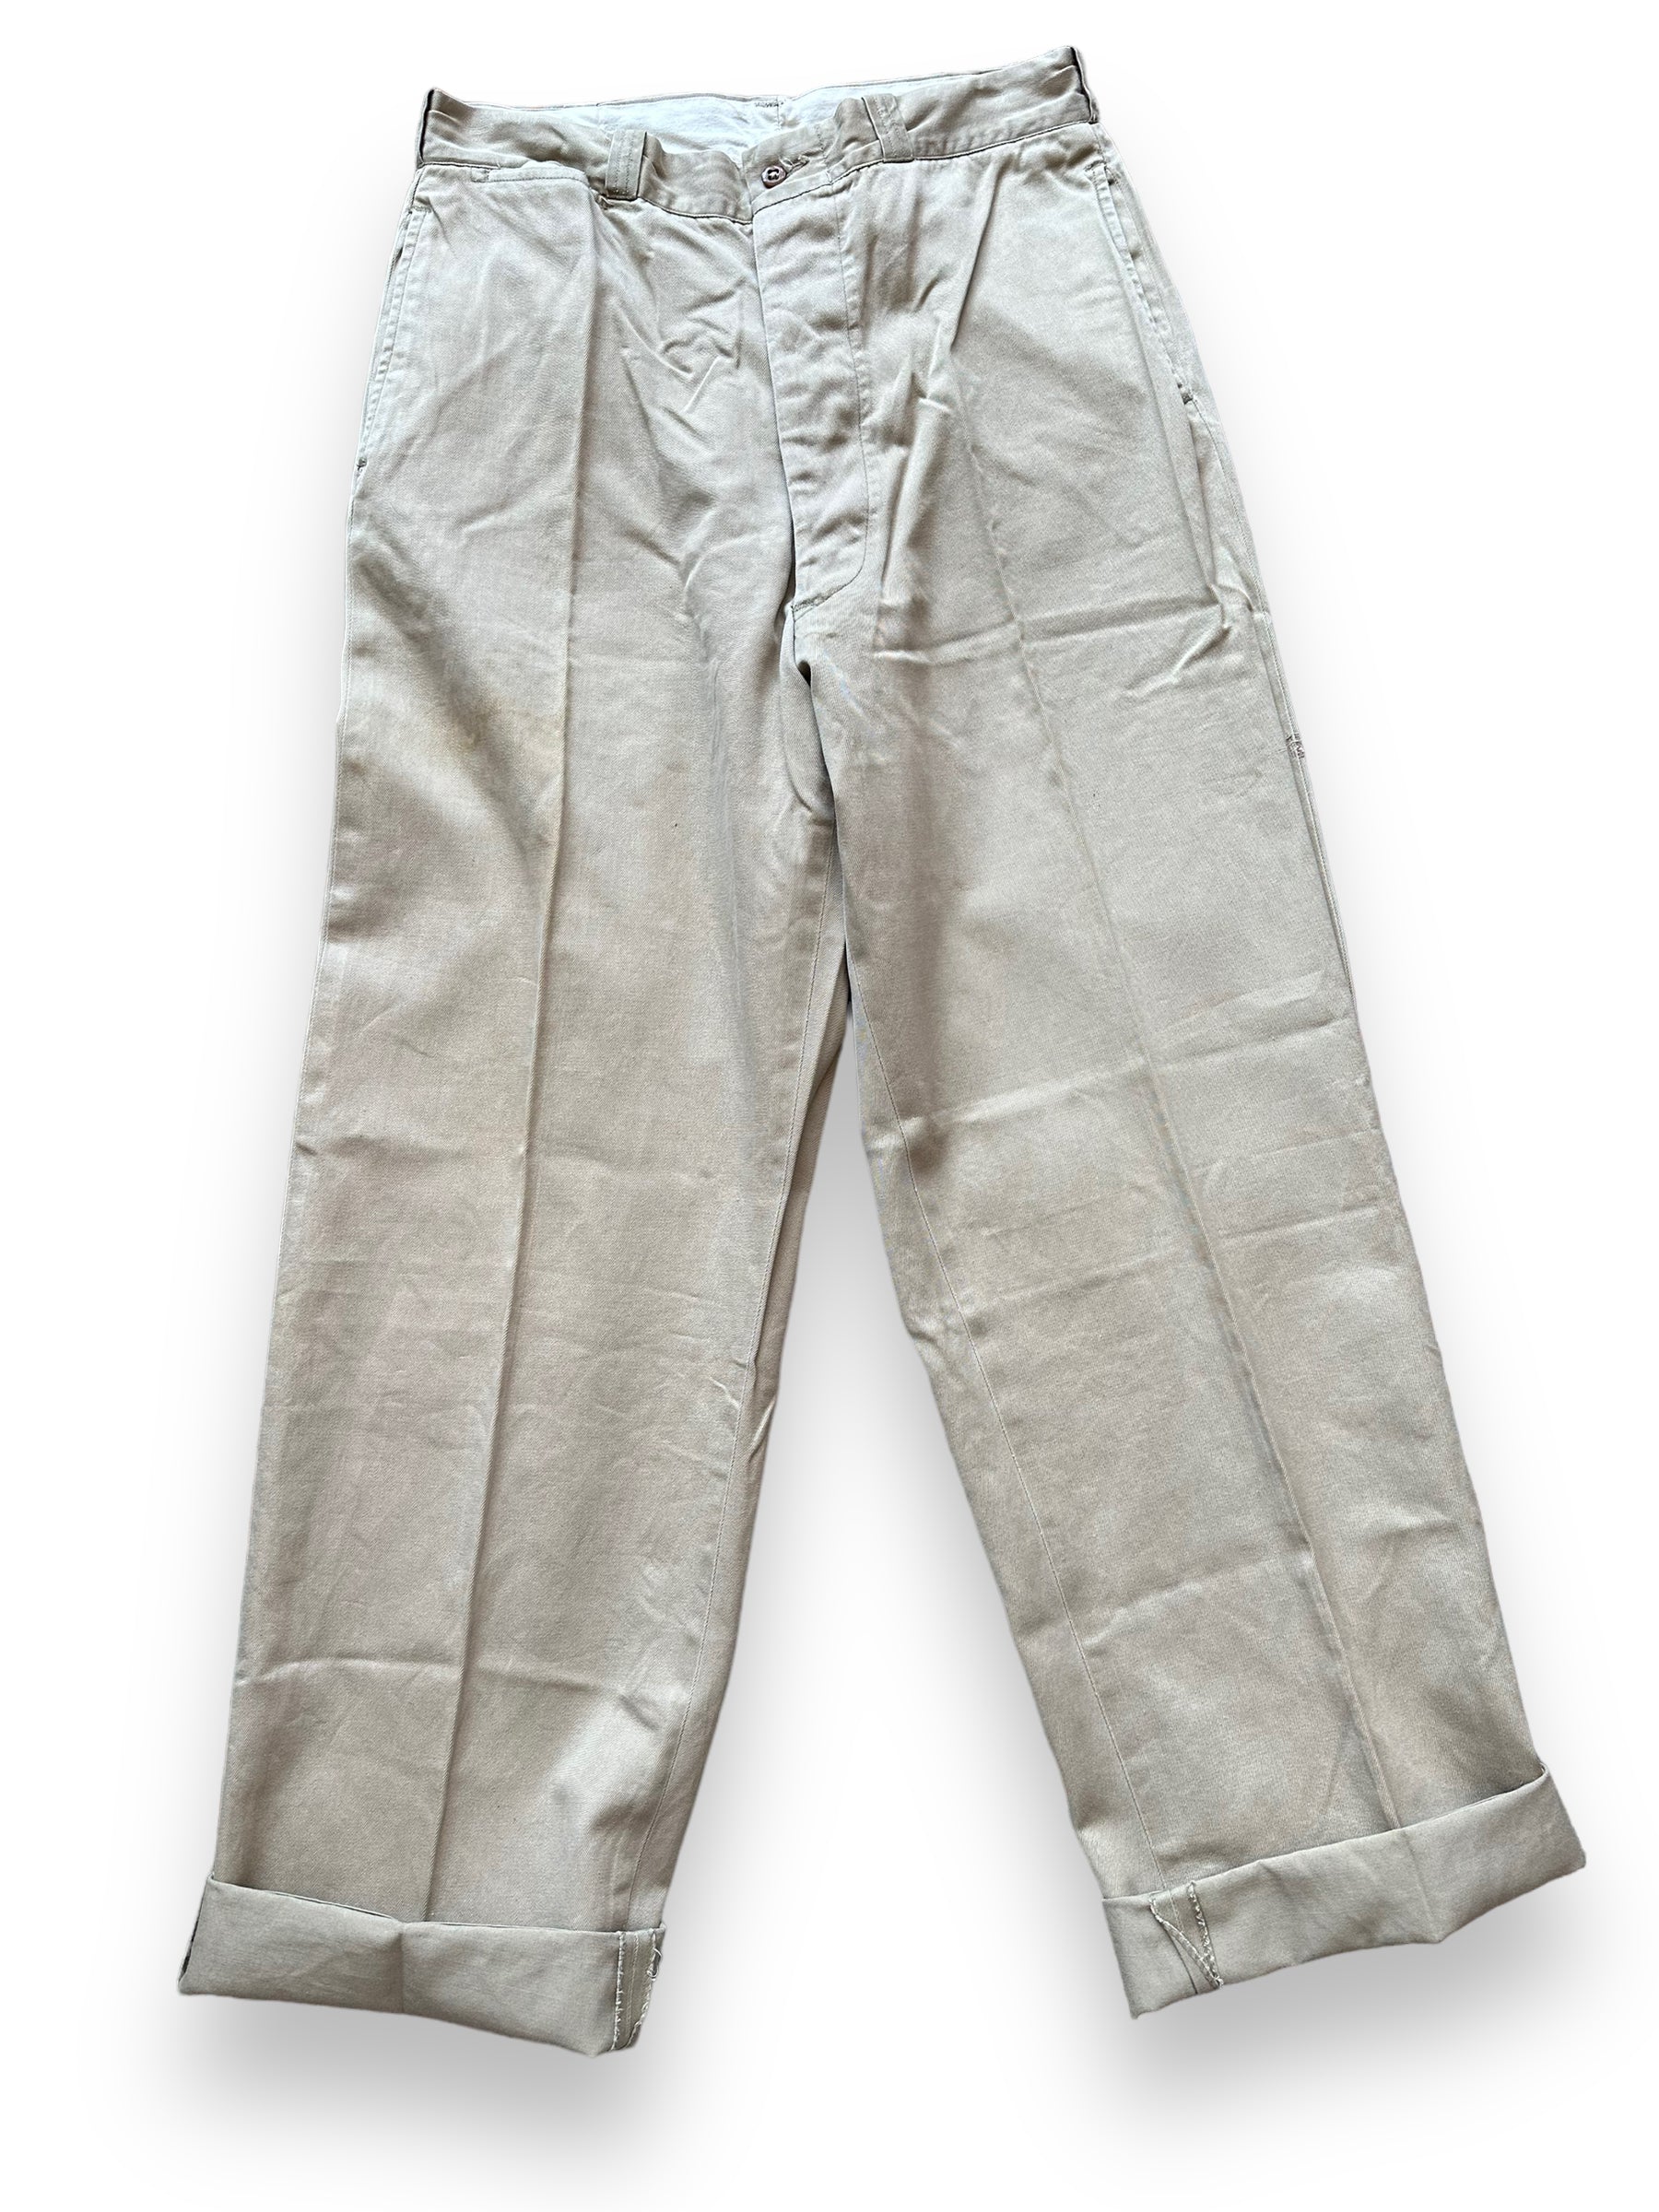 Front View of Vintage 1955 Military Twill Trousers W31 | Barn Owl Vintage Seattle | Vintage Military Chinos Seattle